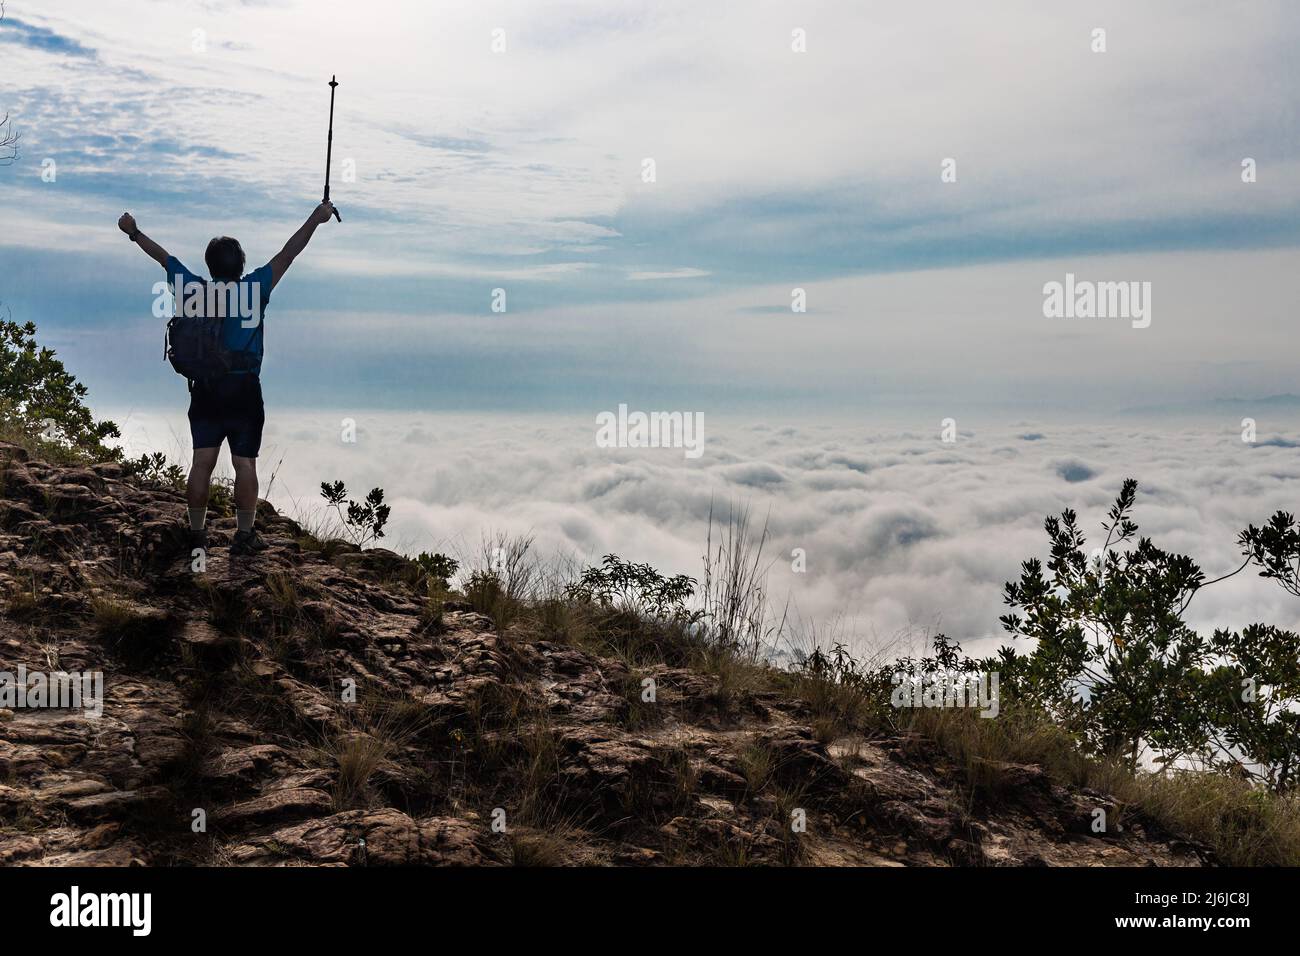 Hiker Asian man in silhouette standing on peak of mountain with cloud scape raises hand to signify success Stock Photo